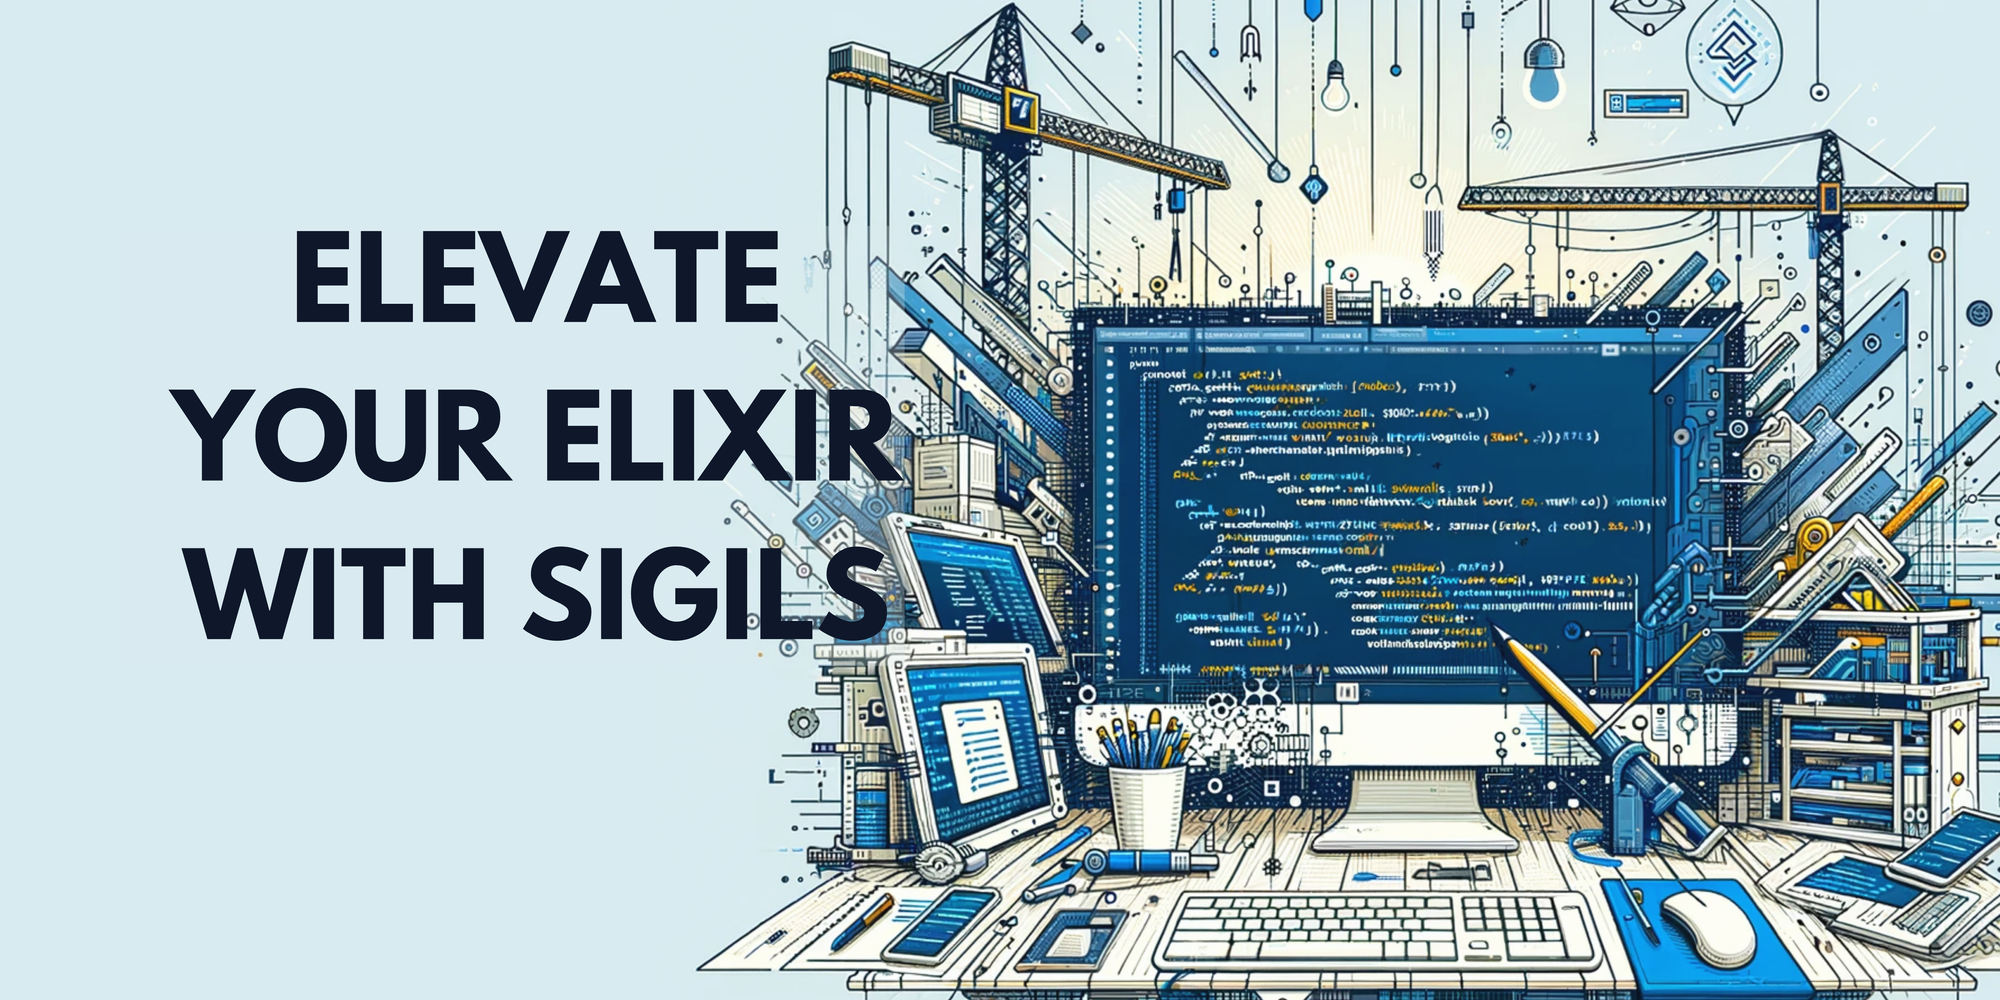 Elevate Your Elixir With Sigils